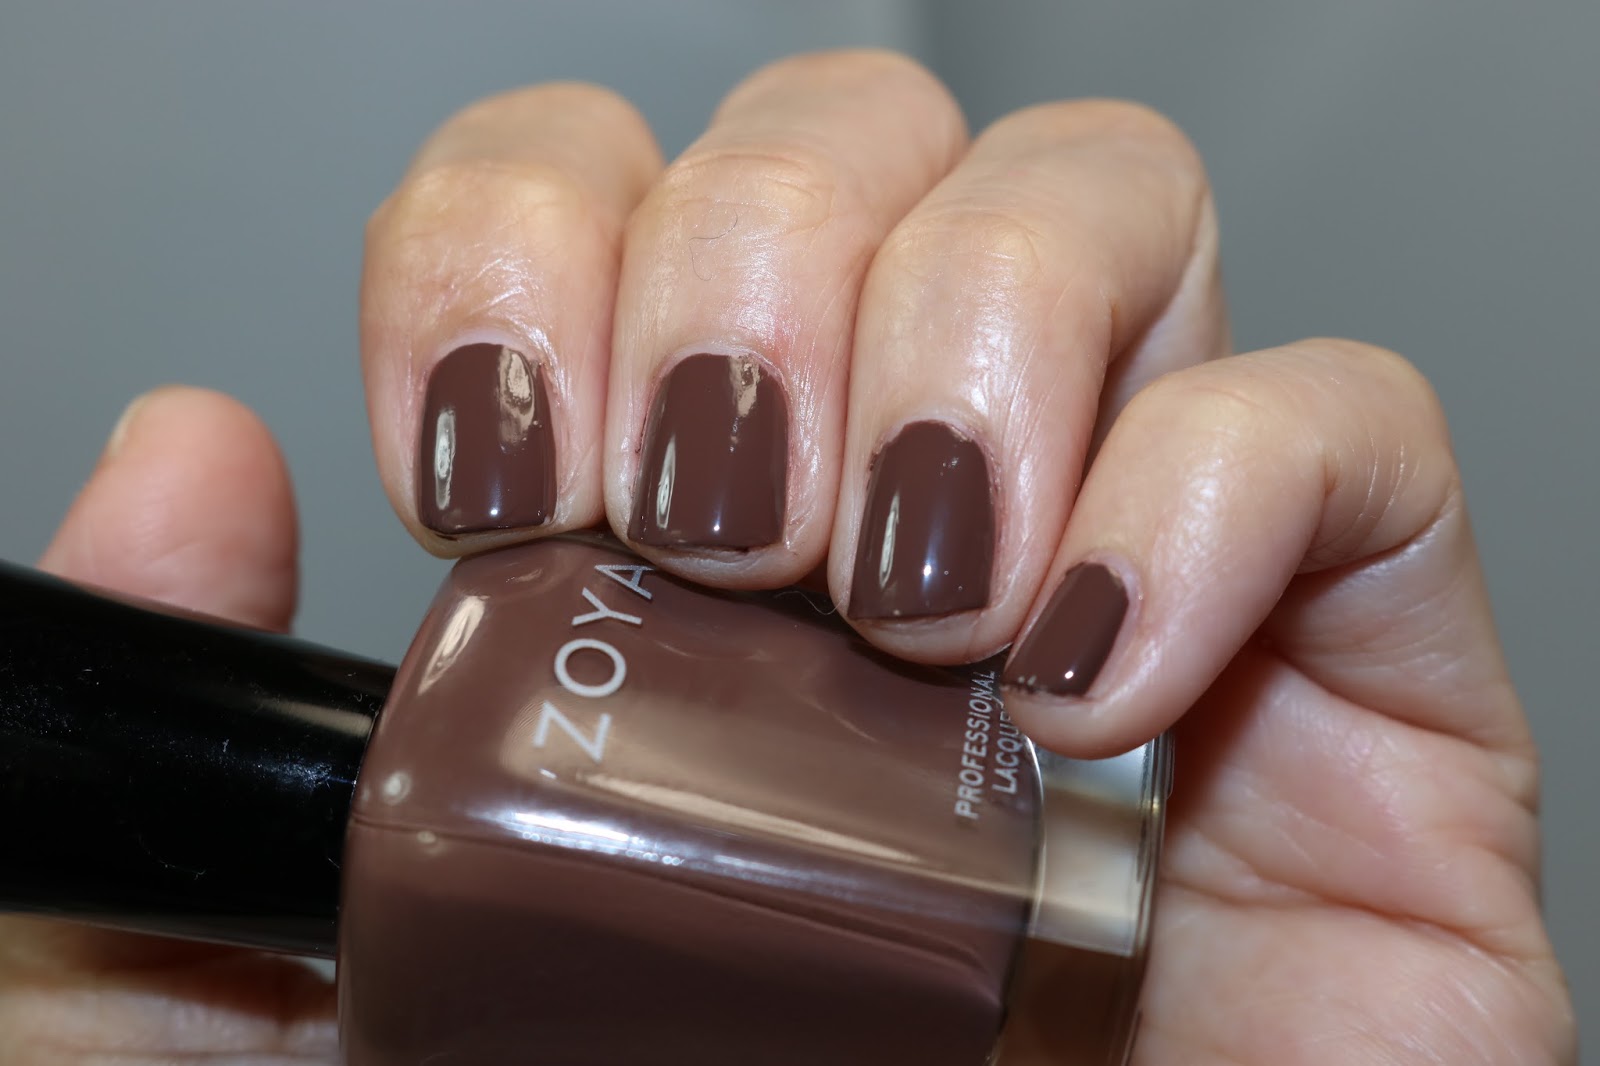 Zoya Nail Polish in "Palm Springs Collection" - wide 1